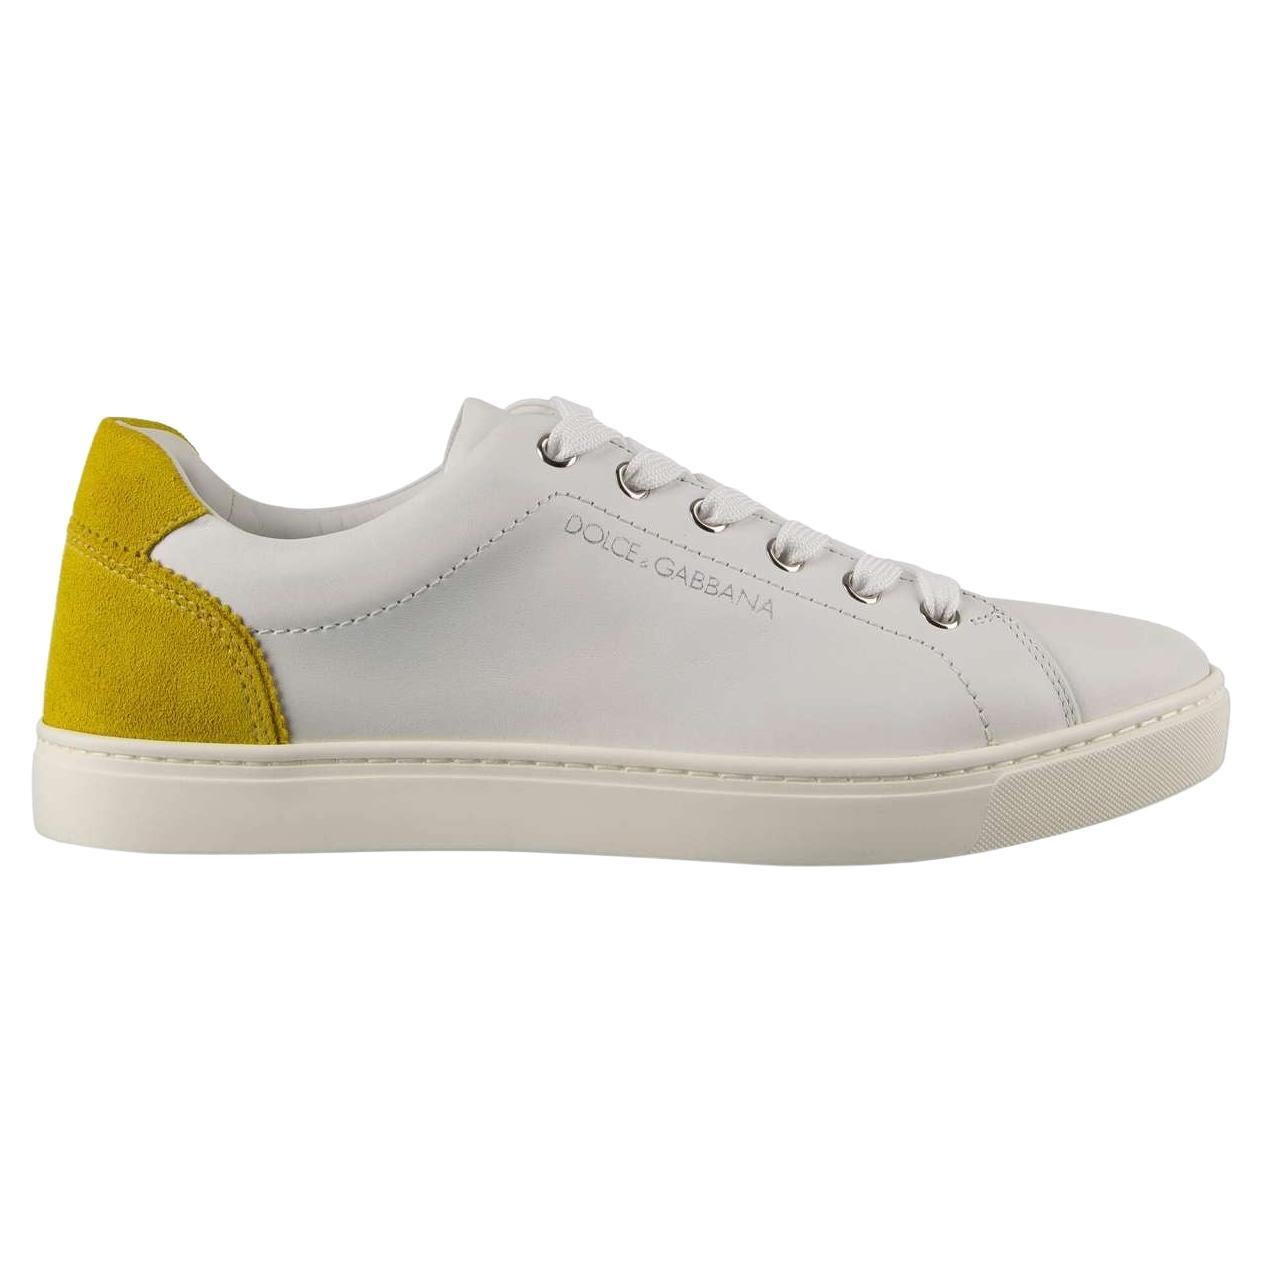 Gabbana - Leather Sneakers White Yellow EUR 40 For Sale 1stDibs